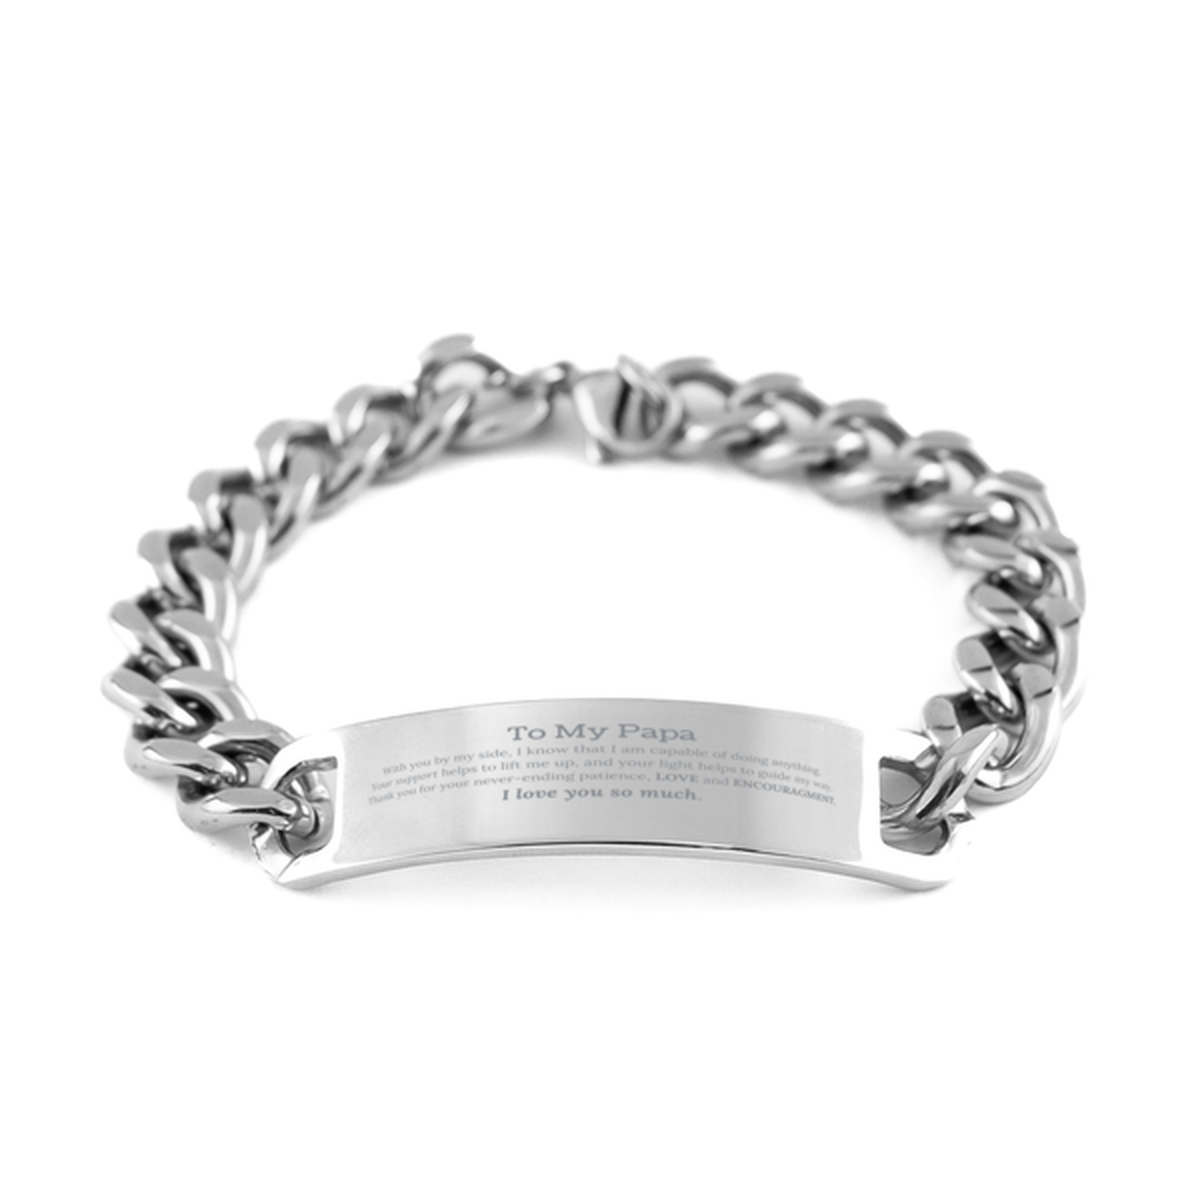 Appreciation Papa Cuban Chain Stainless Steel Bracelet Gifts, To My Papa Birthday Christmas Wedding Keepsake Gifts for Papa With you by my side, I know that I am capable of doing anything. I love you so much